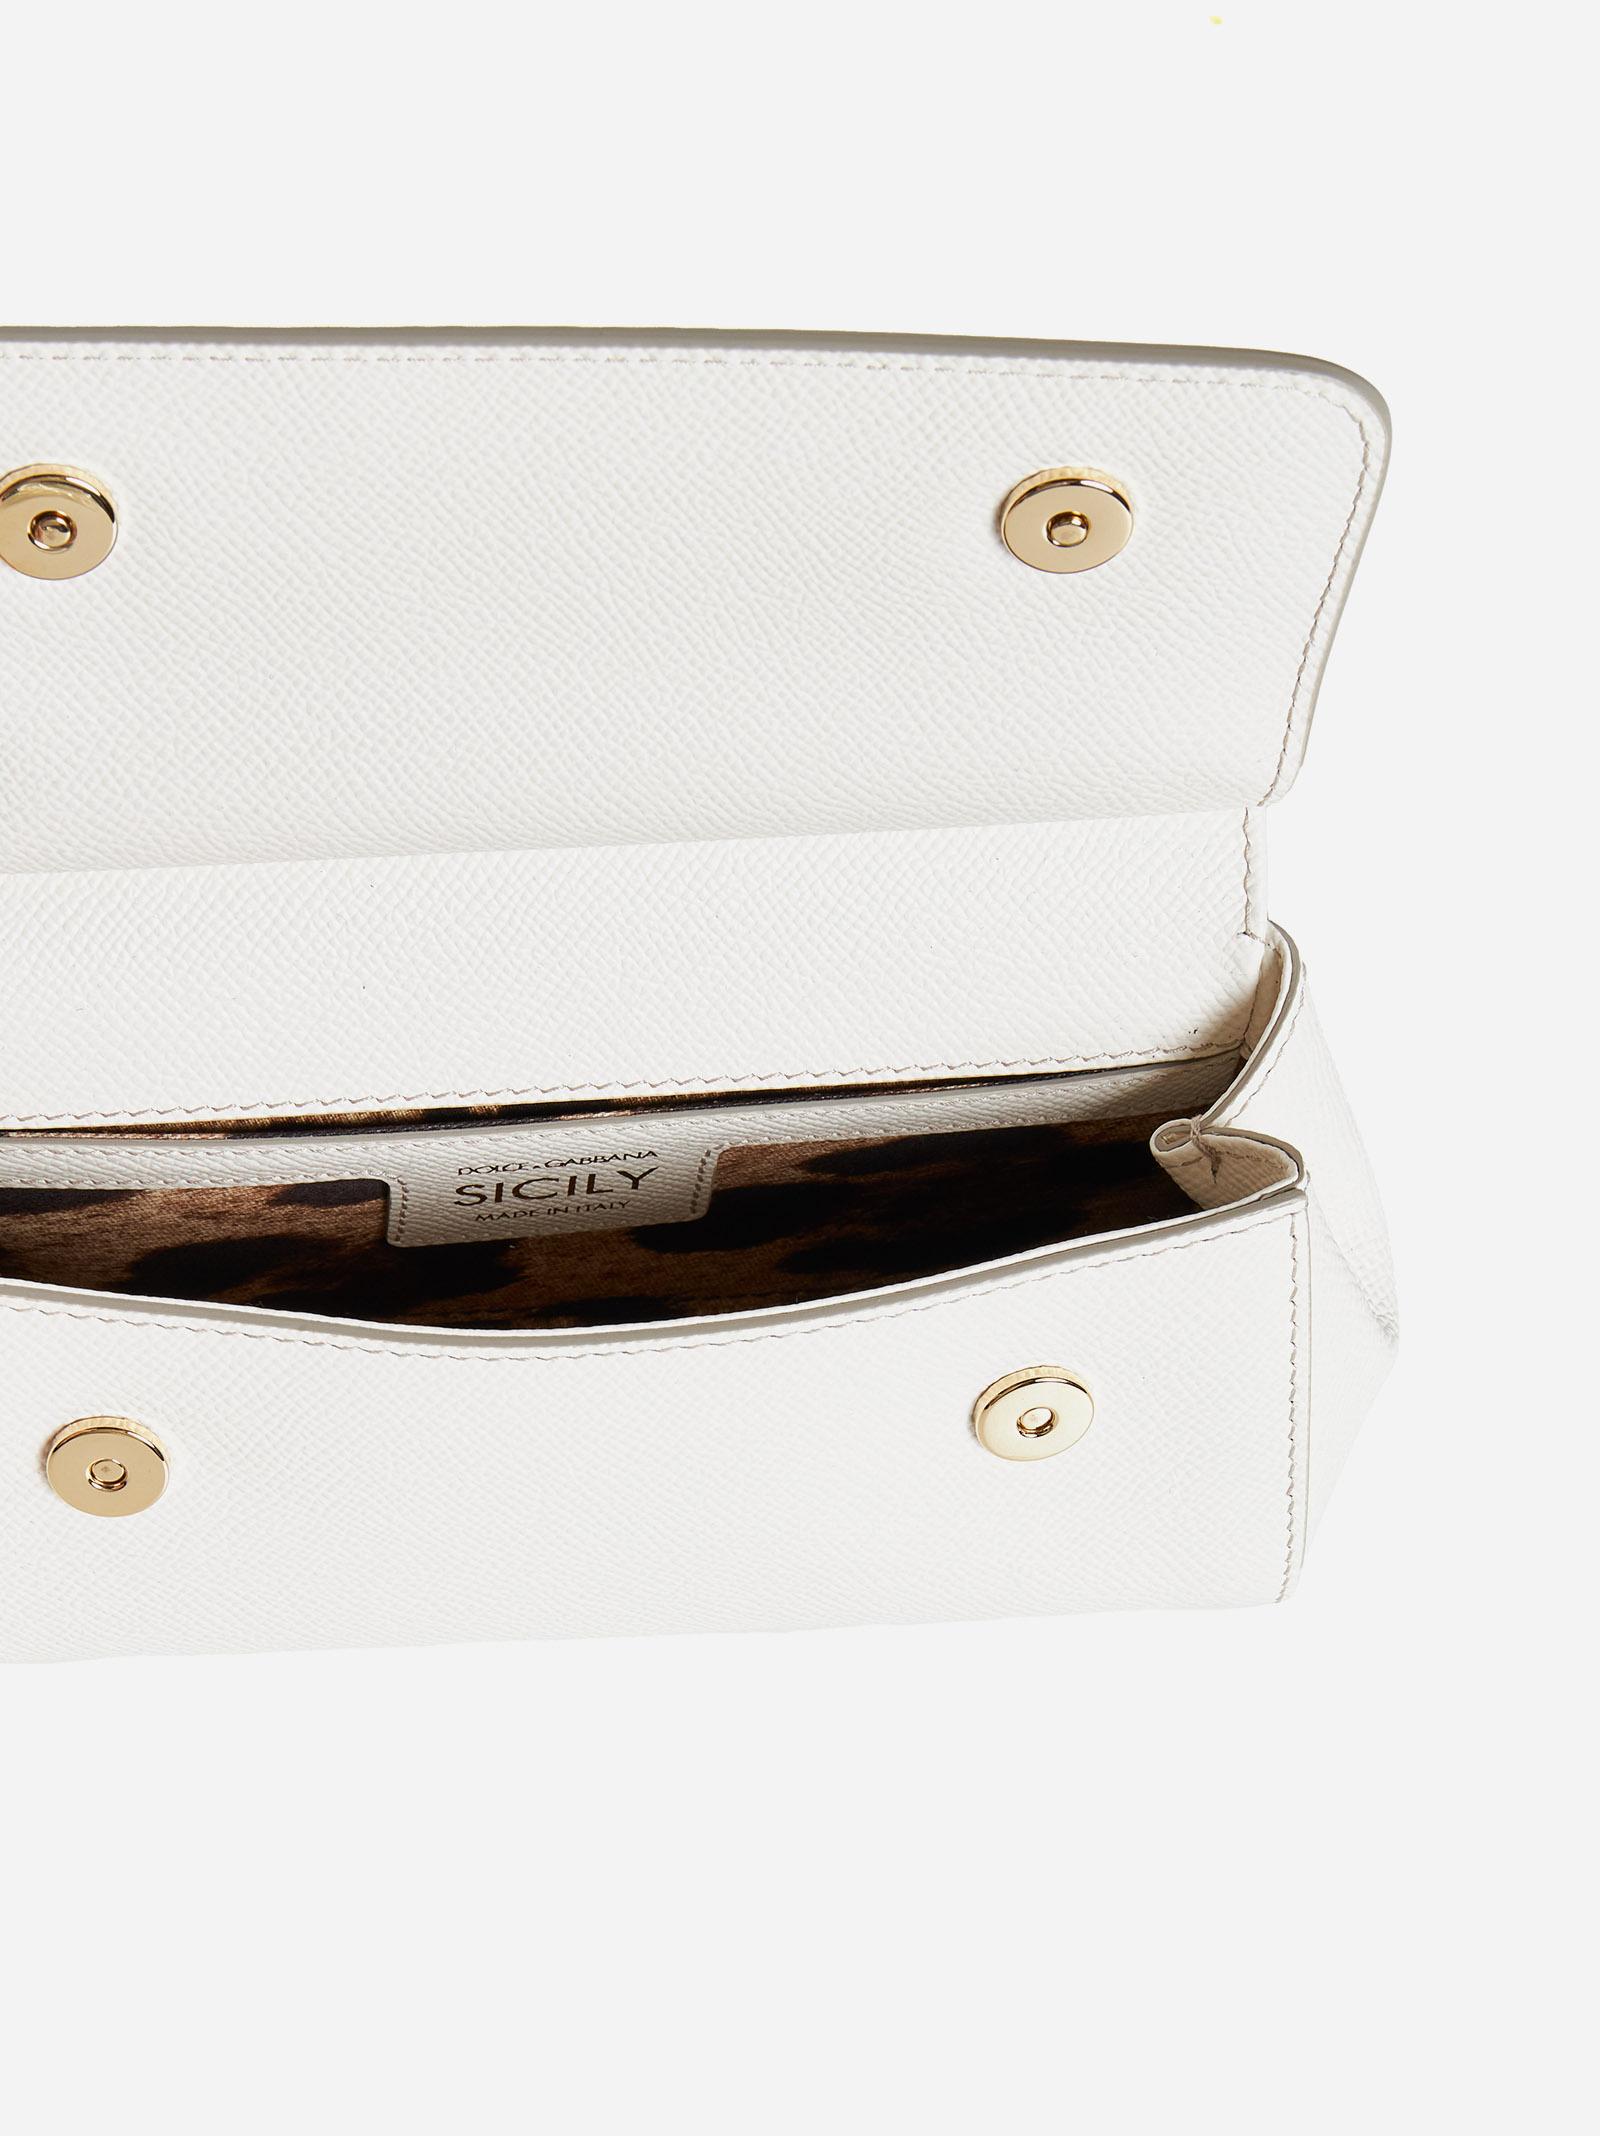 Dolce & Gabbana Sicily Small Leather Bag in White | Lyst